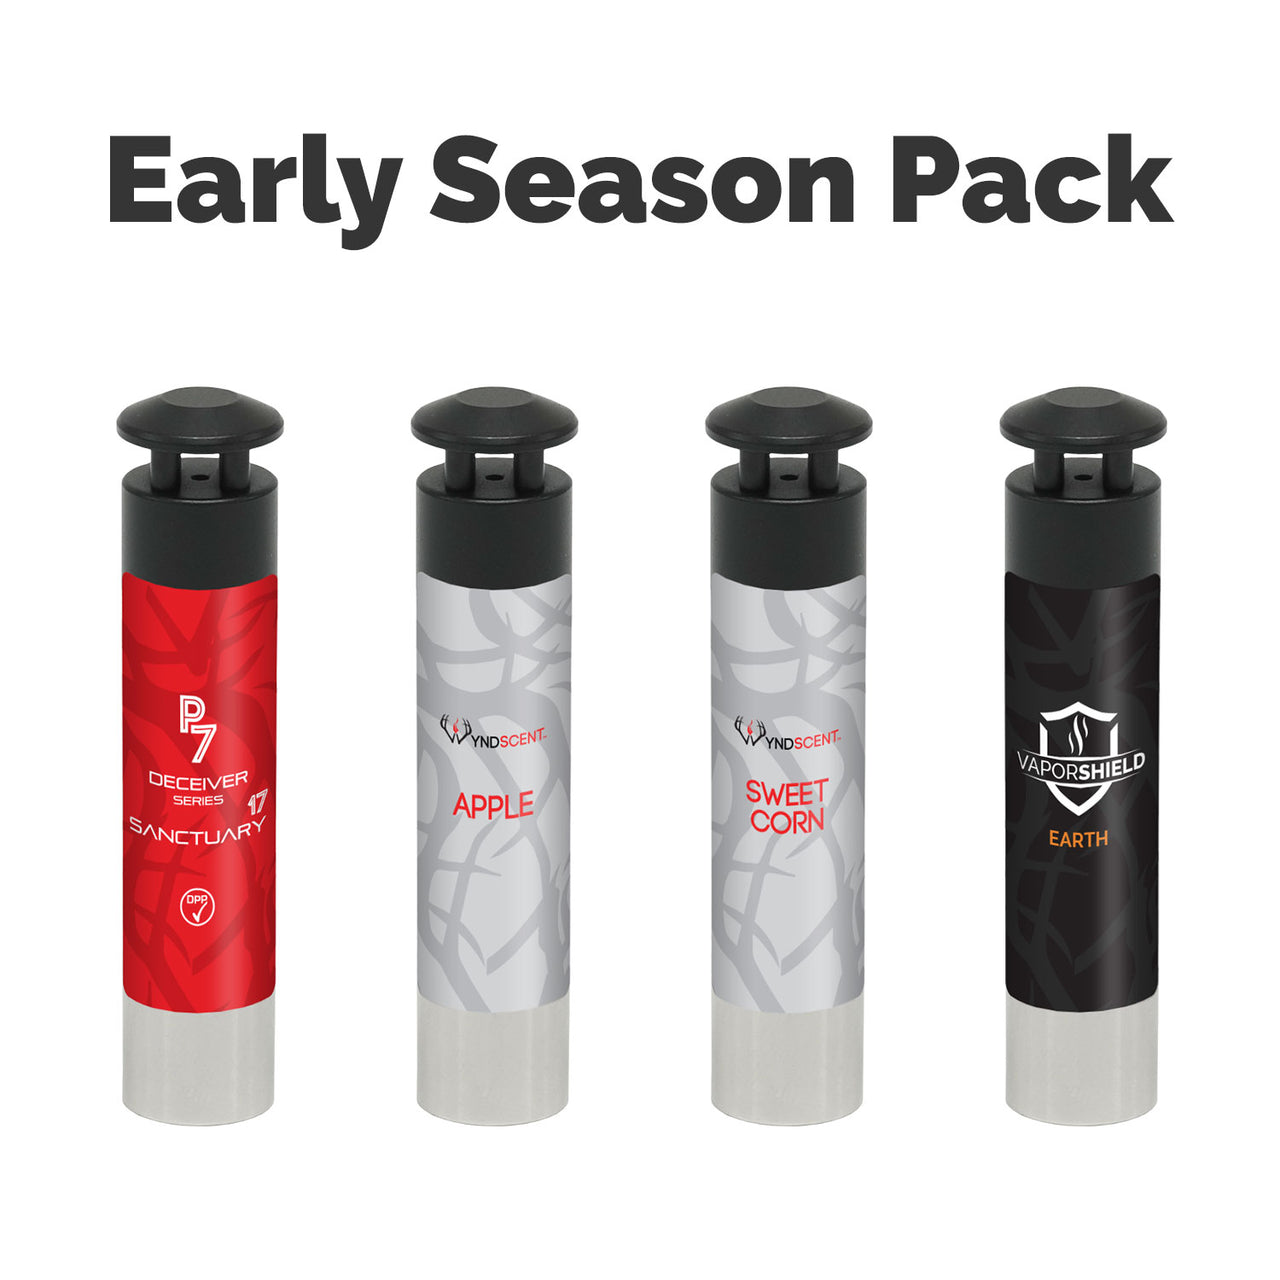 Wyndscent 2.0 Early Season Scent Pack